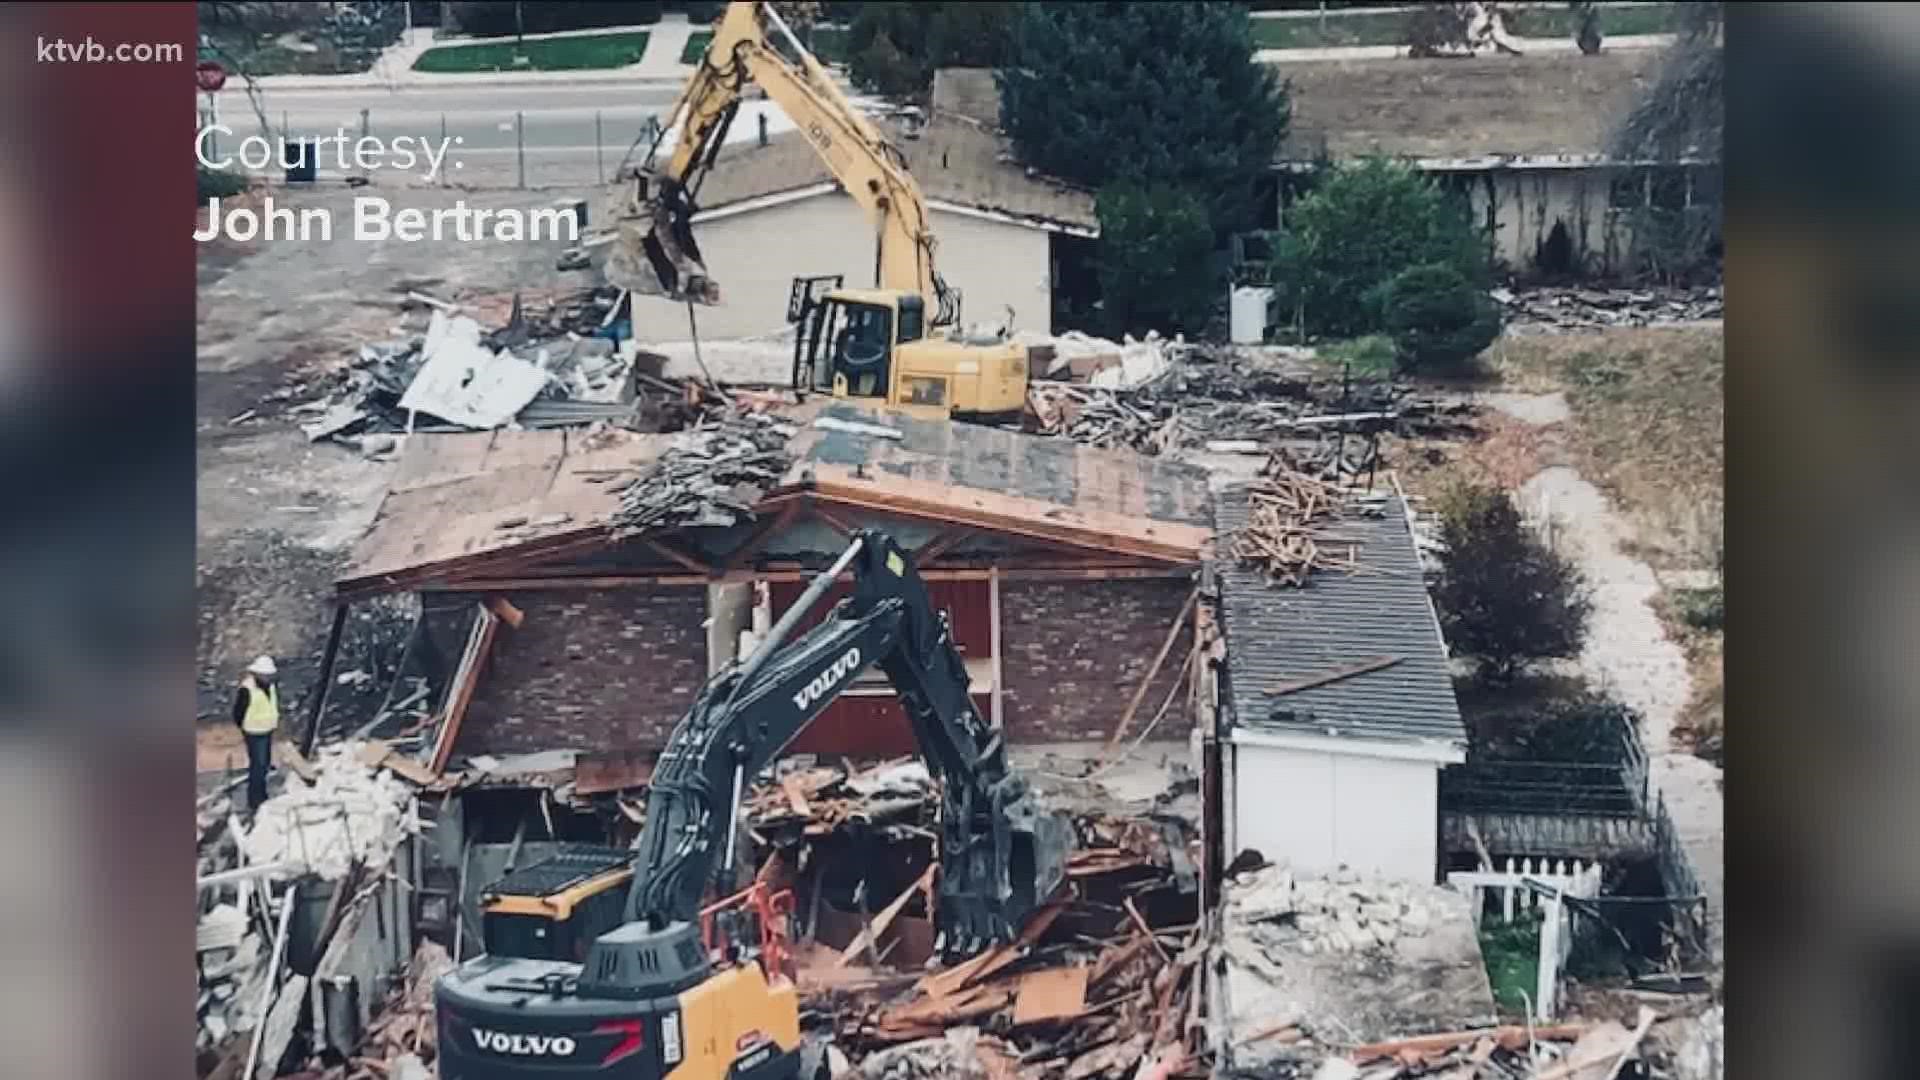 Earlier this month, Ridenbaugh Place apartments were demolished and are set to be replaced by luxury, student housing created by a St. Louis developer.